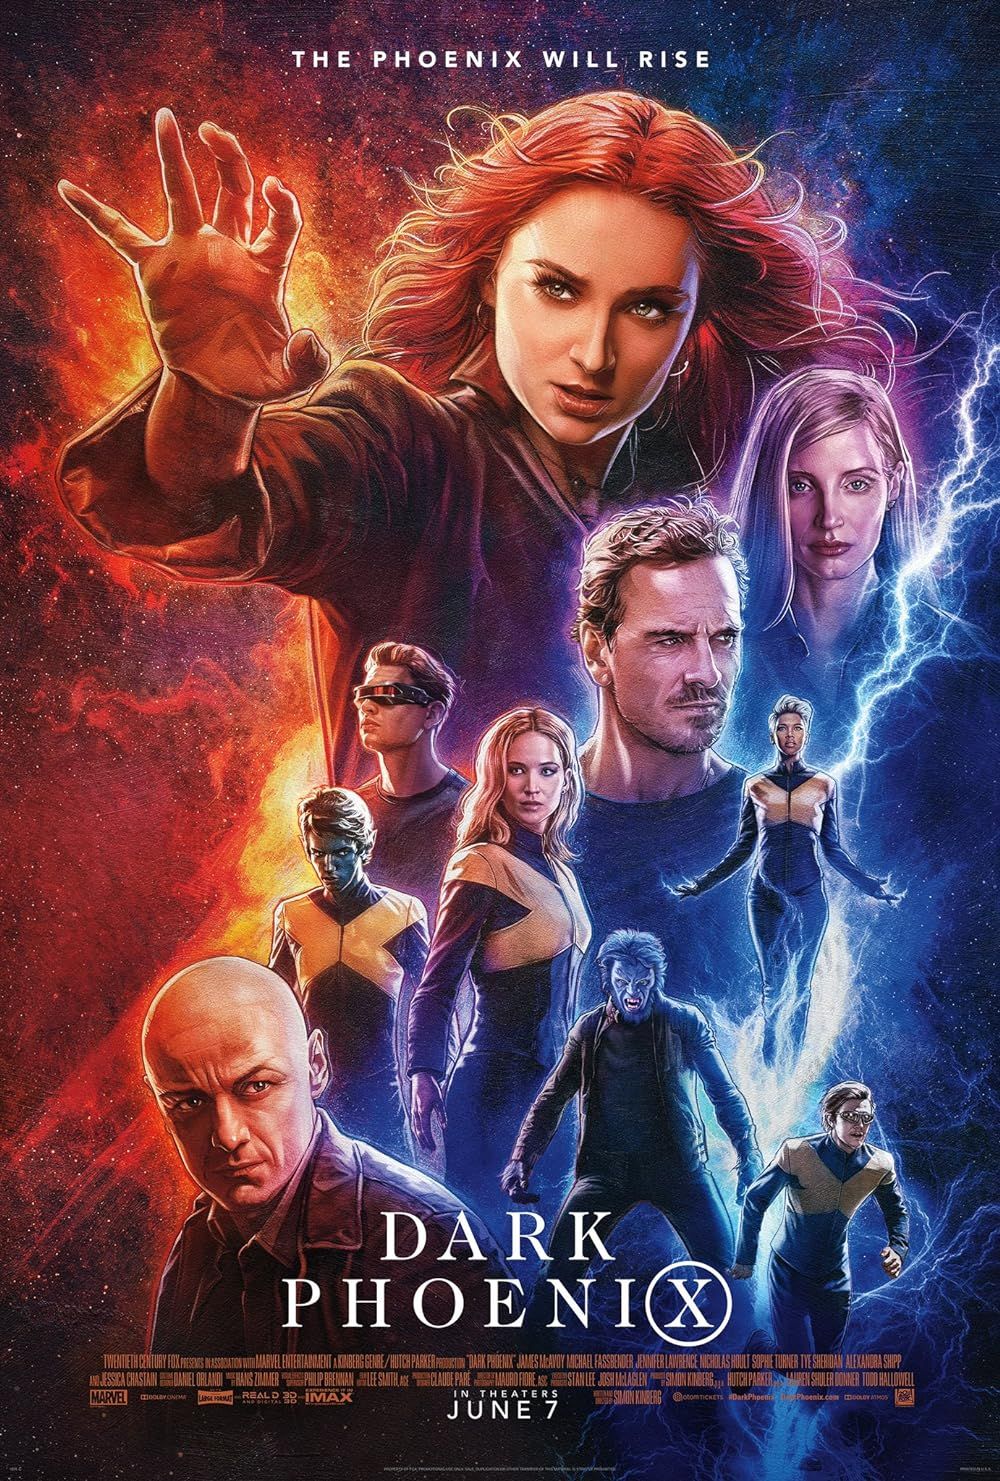 The cast on the movie poster for Dark Phoenix